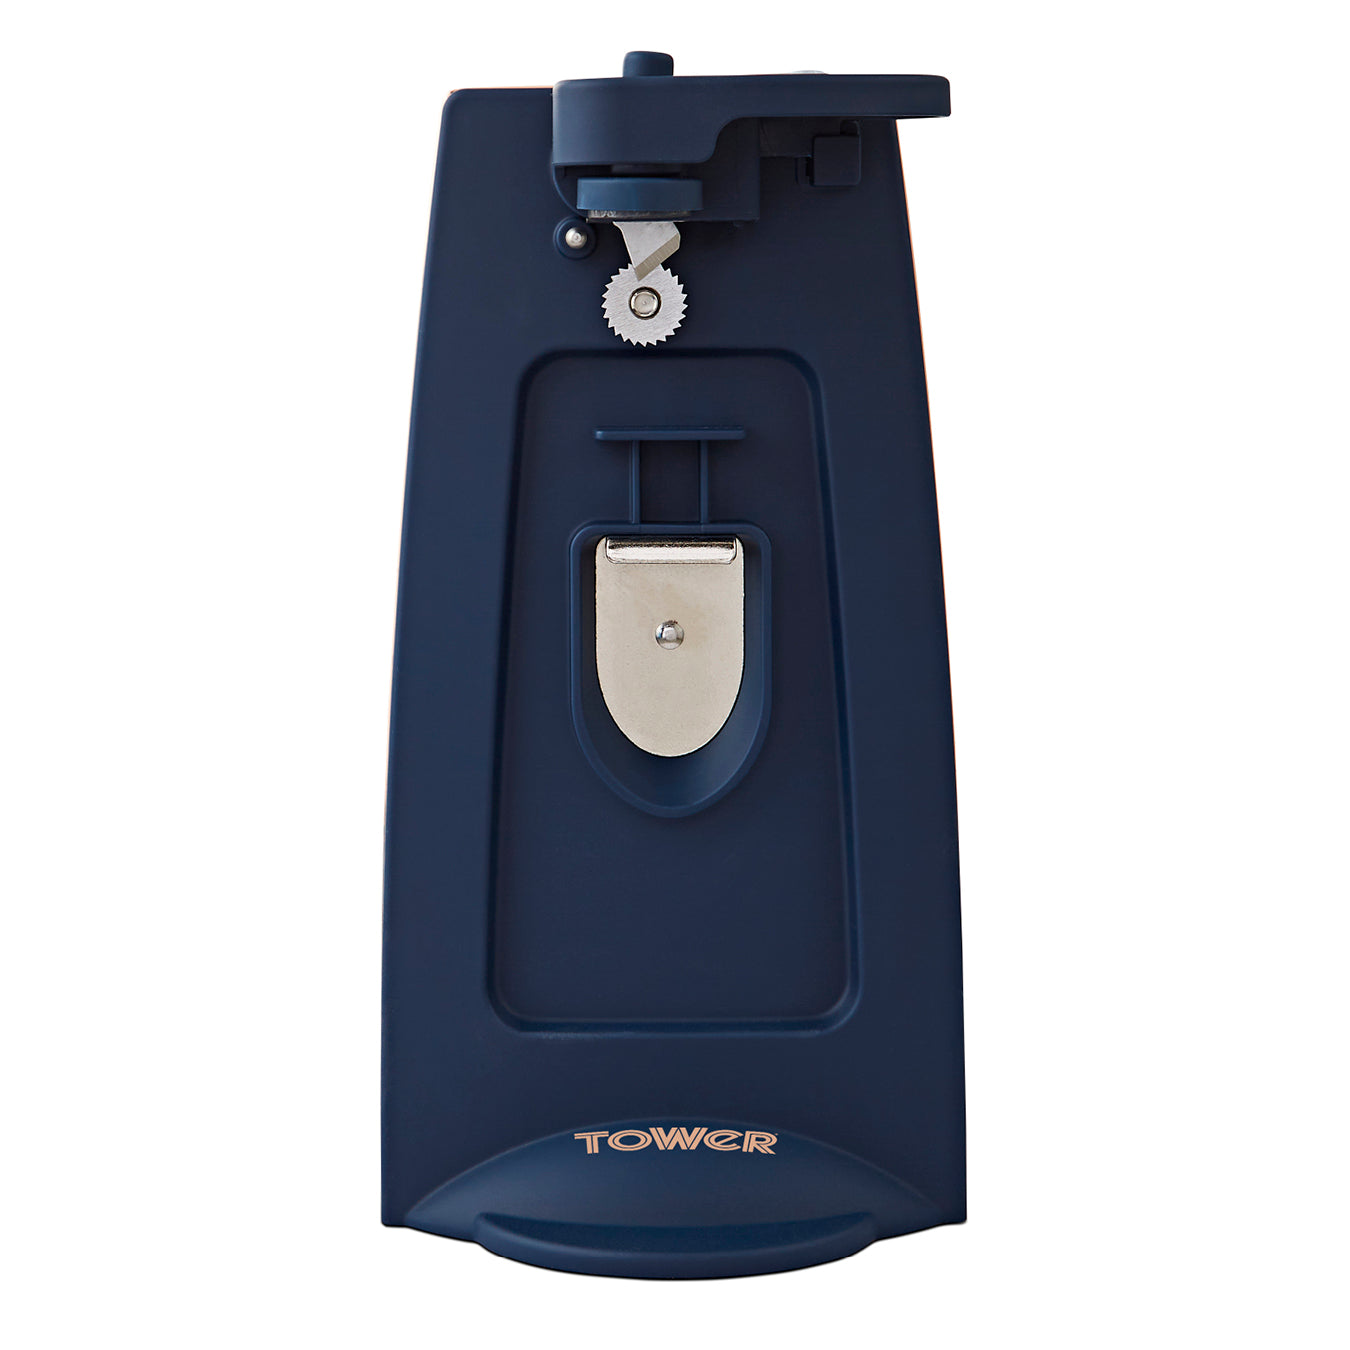 Tower Cavaletto 3 in 1 Can Opener - Midnight Blue